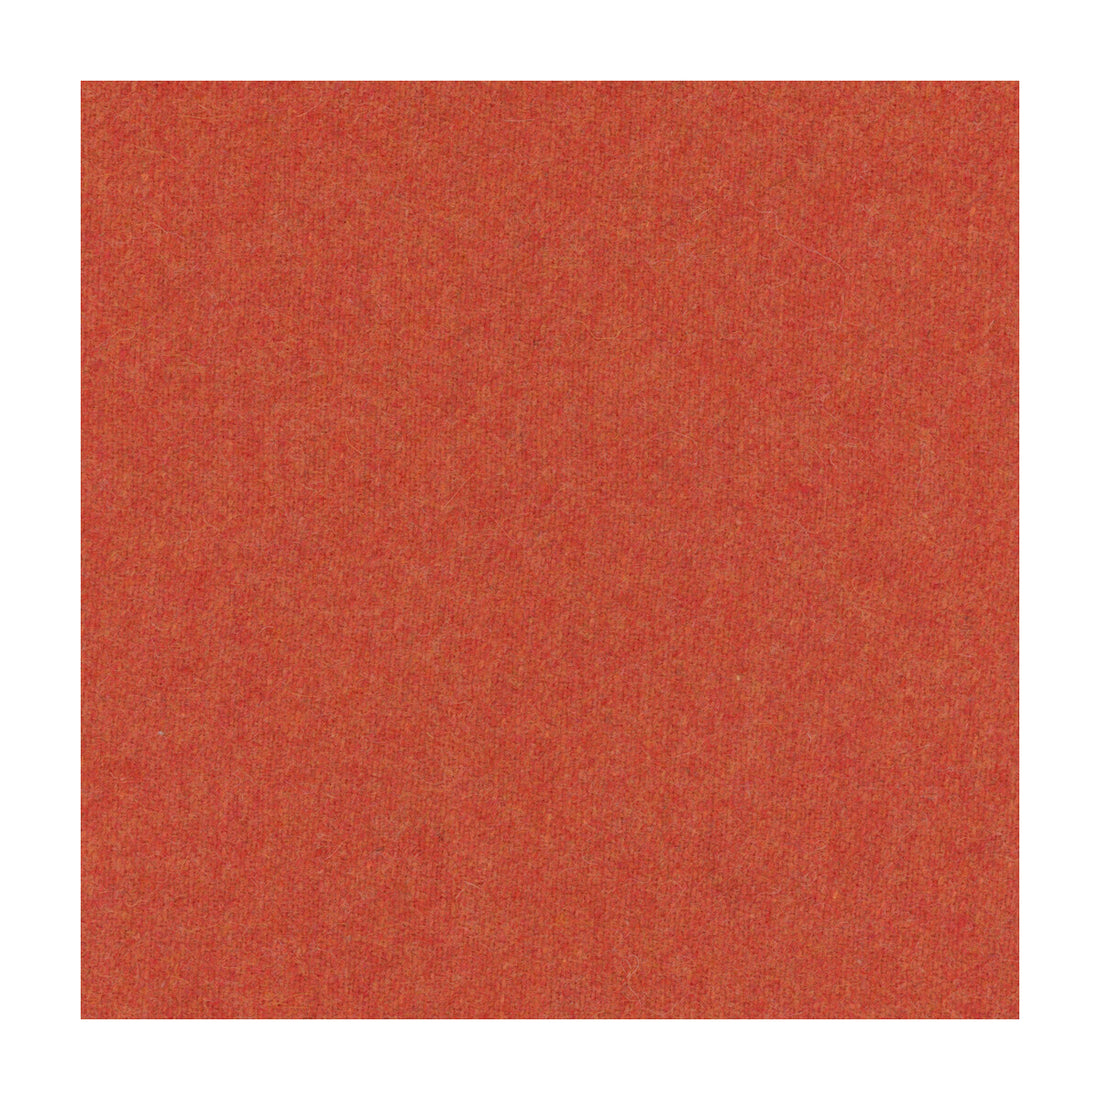 Jefferson Wool fabric in persimmon color - pattern 34397.12.0 - by Kravet Contract